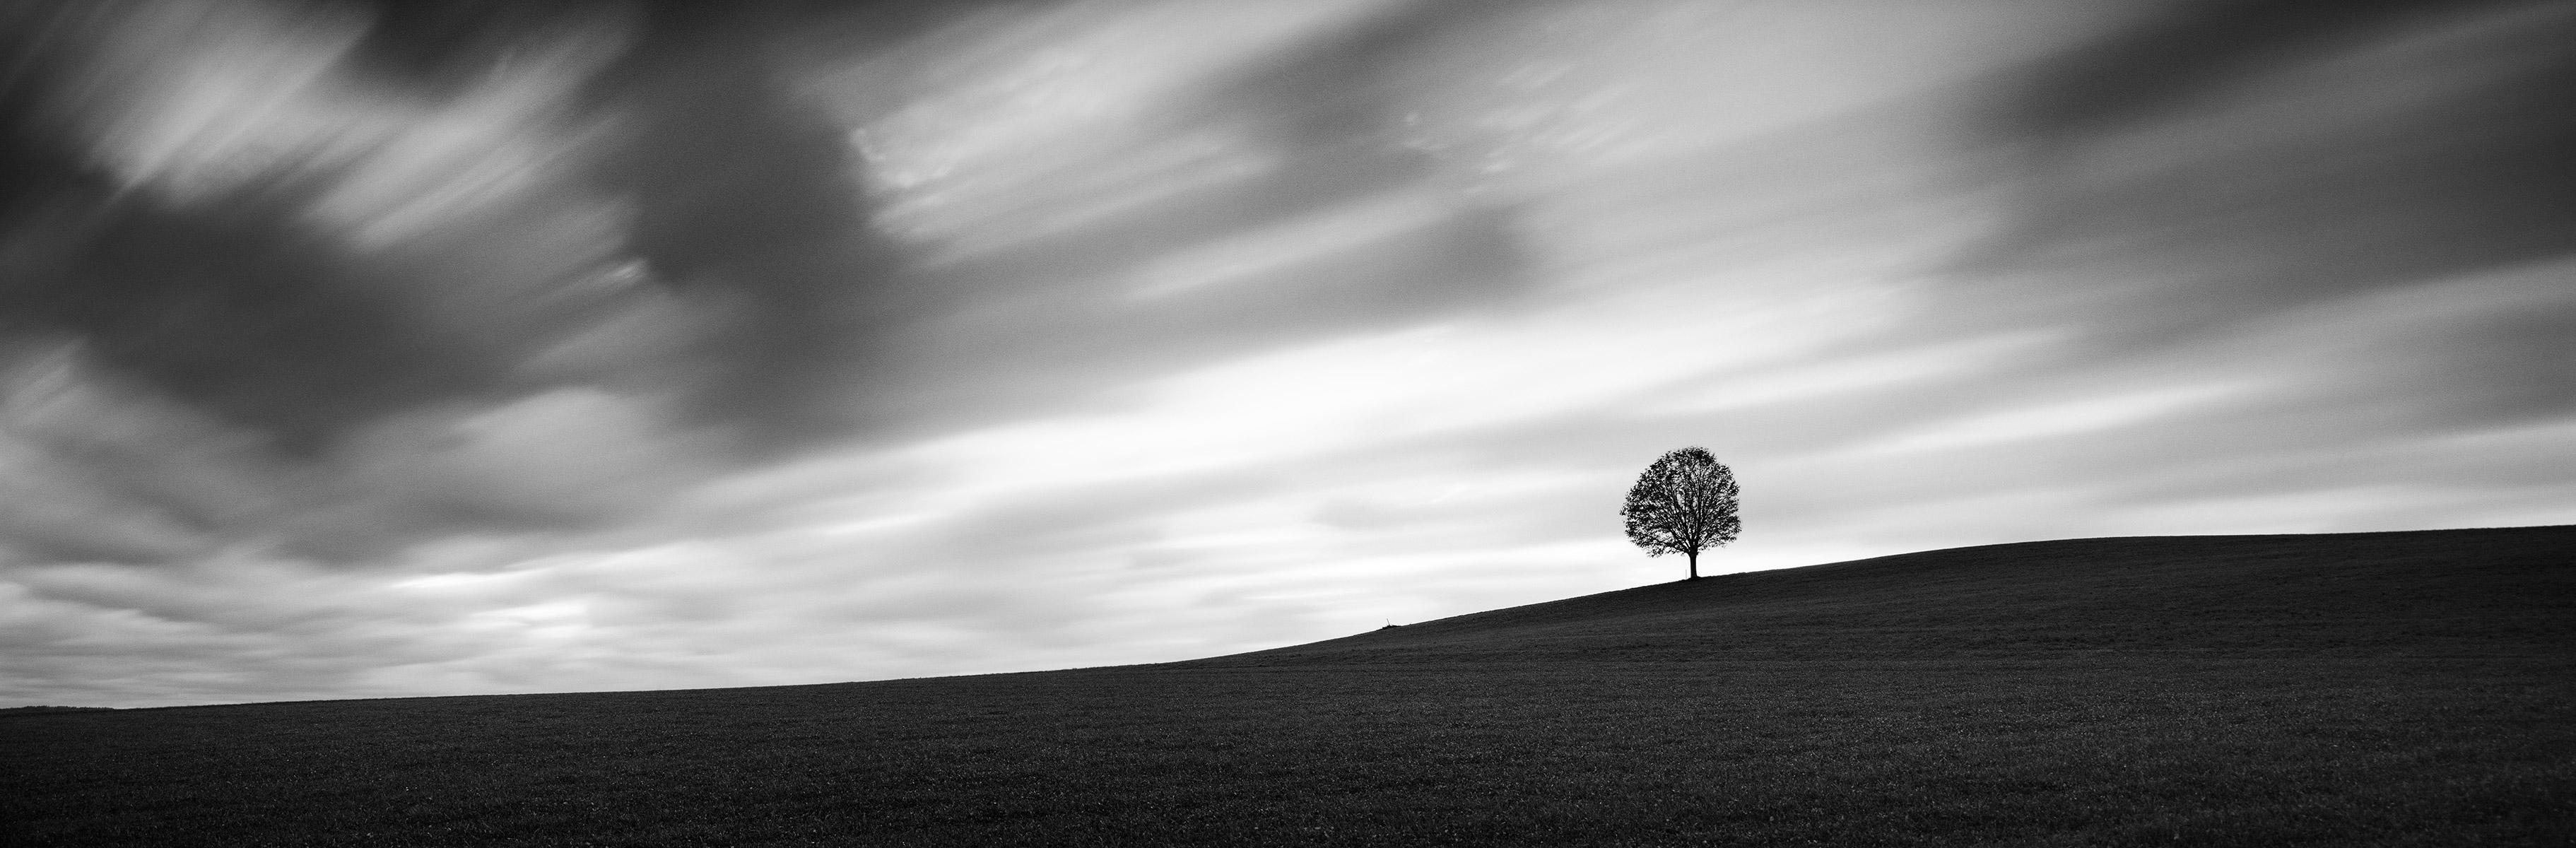 Turbulent Times, Single Tree, Storm, Long Exposure, black and white photography